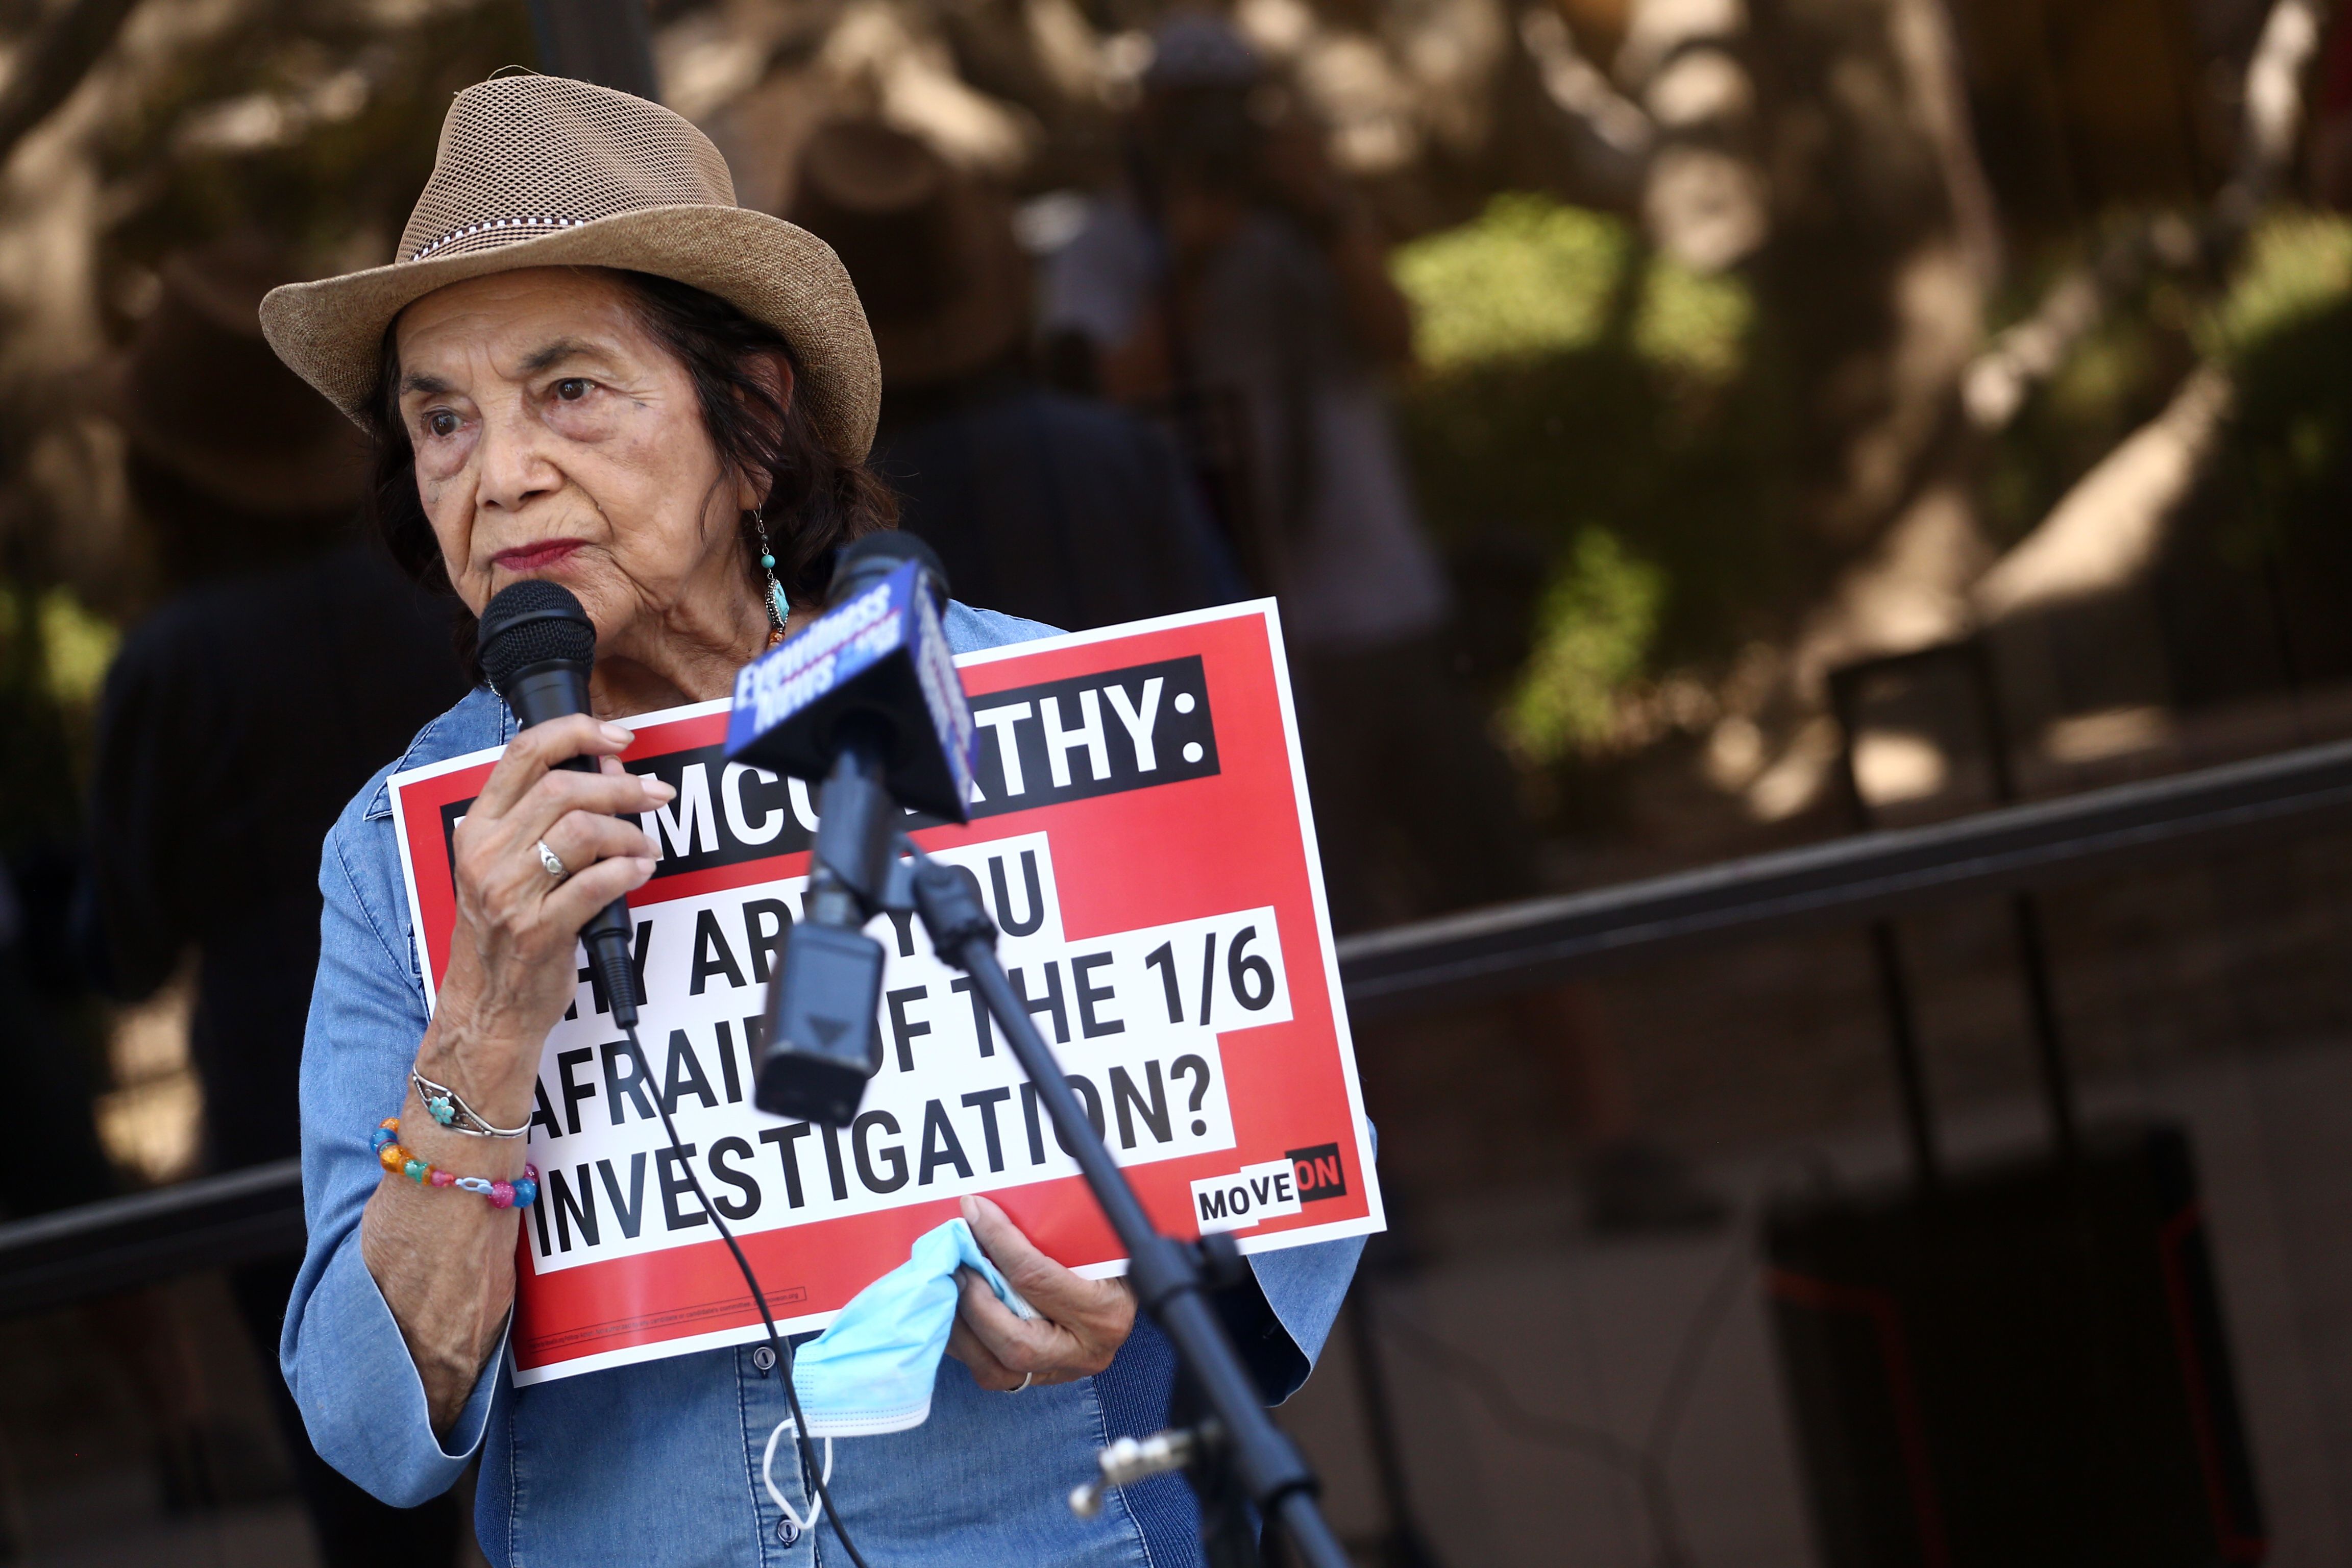 Dolores Huerta speaks during the MoveOn rally at Rep. McCarthy's office on July 27, 2021 in Bakersfield, California.